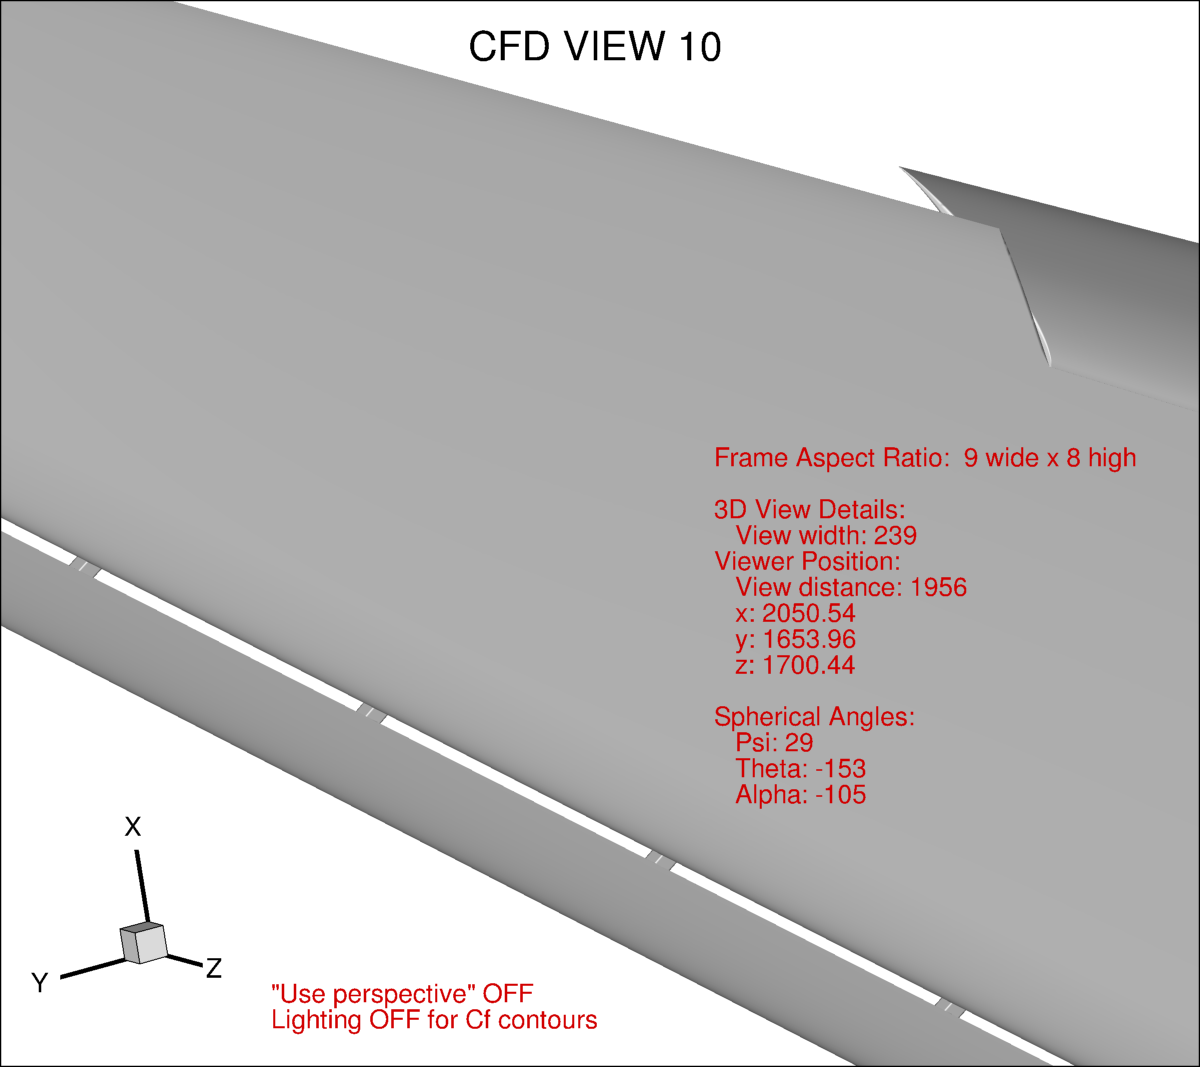 Example CFD view #10